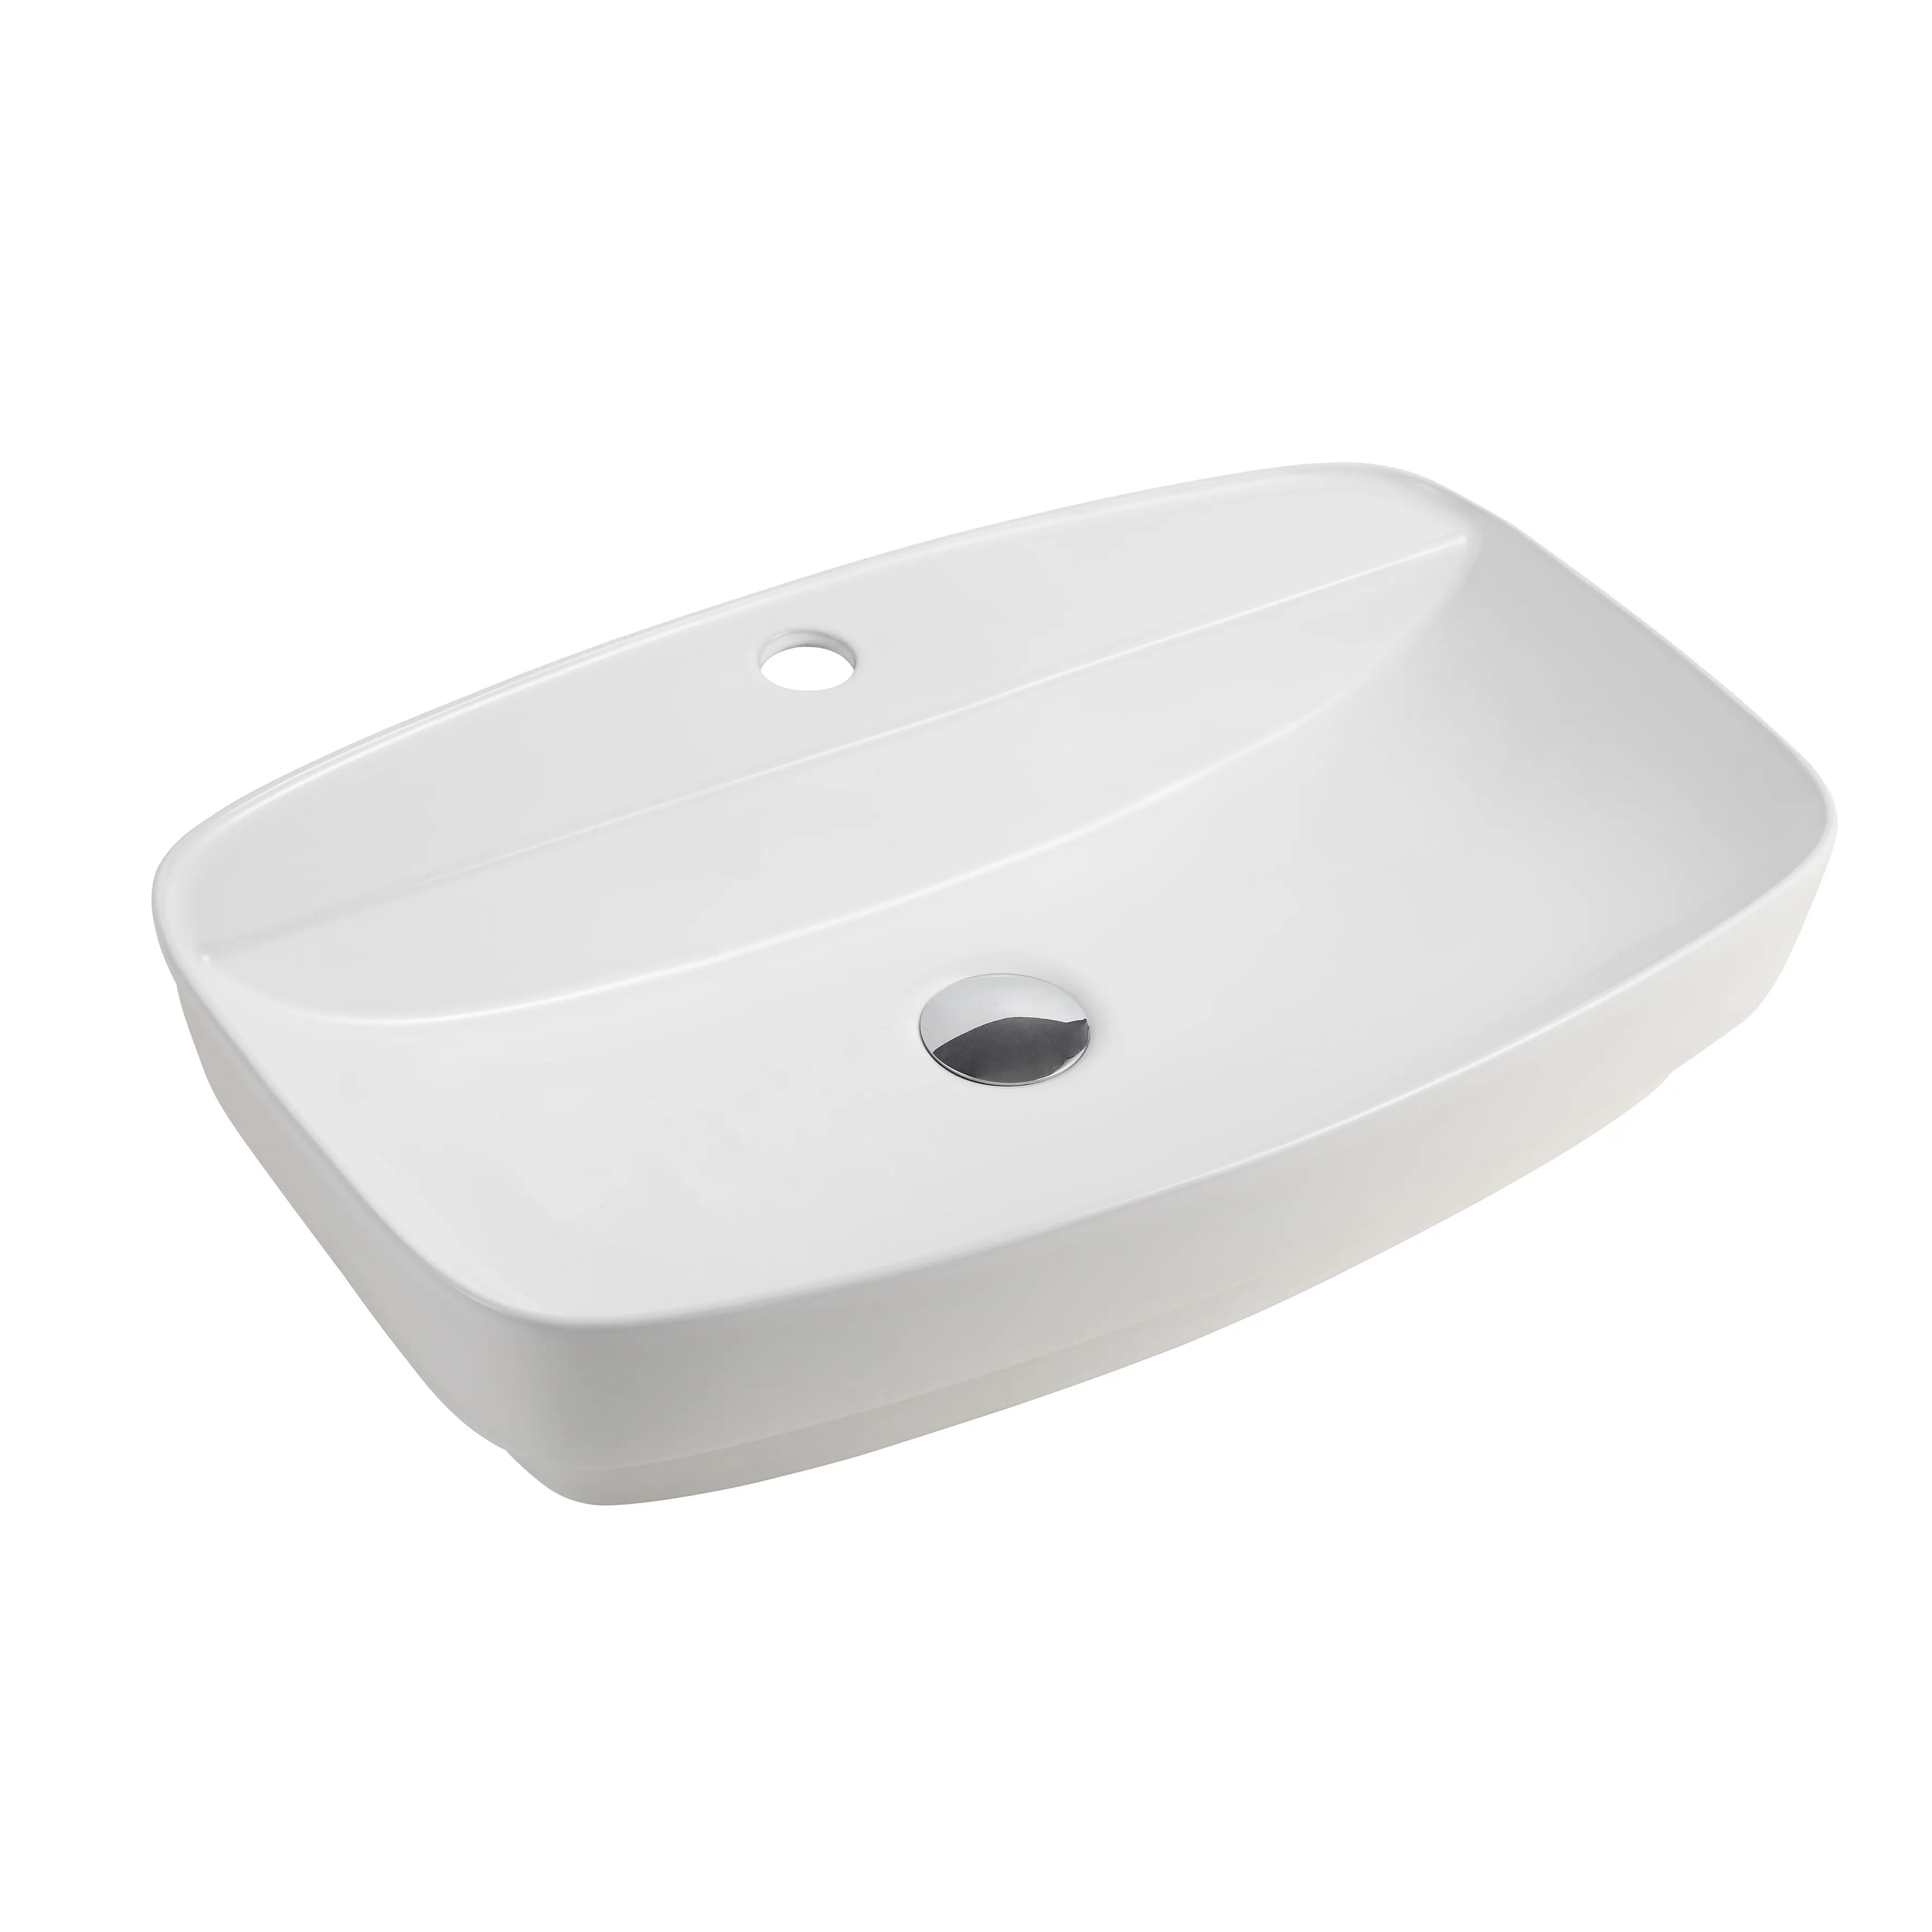 New design hotel unique porcelain modern glossy white ceramic table top small wash basin bathroom sink